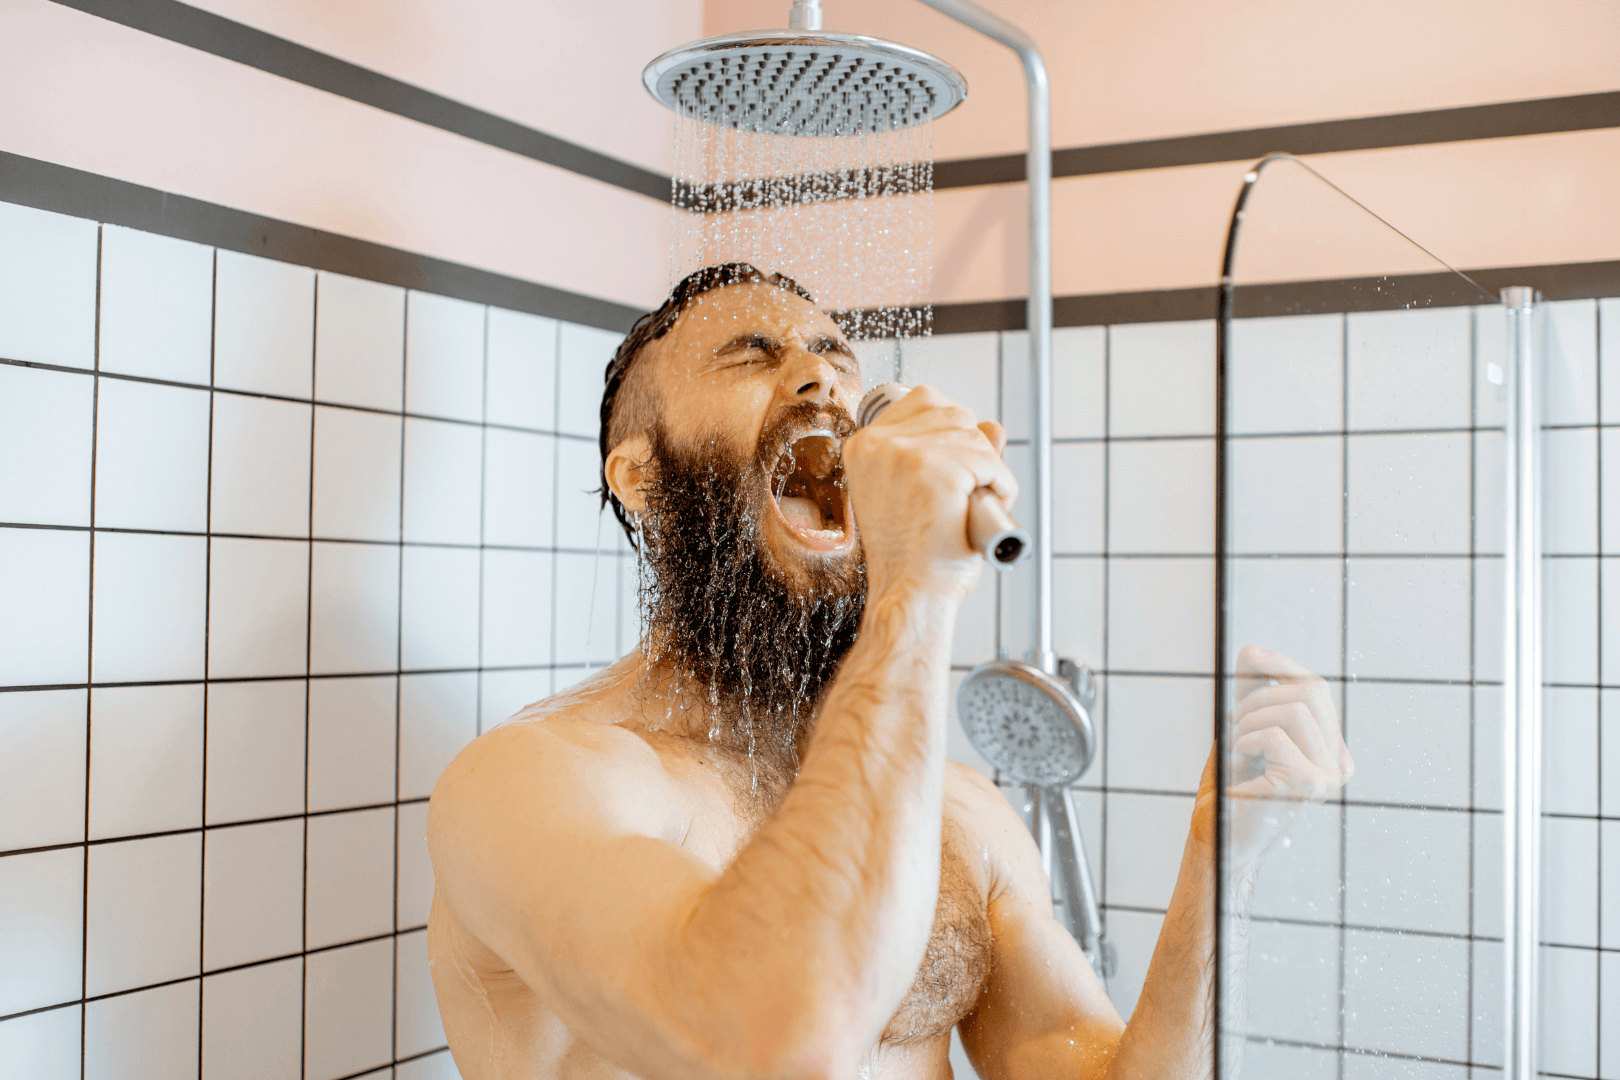 What's the best shower frequency?